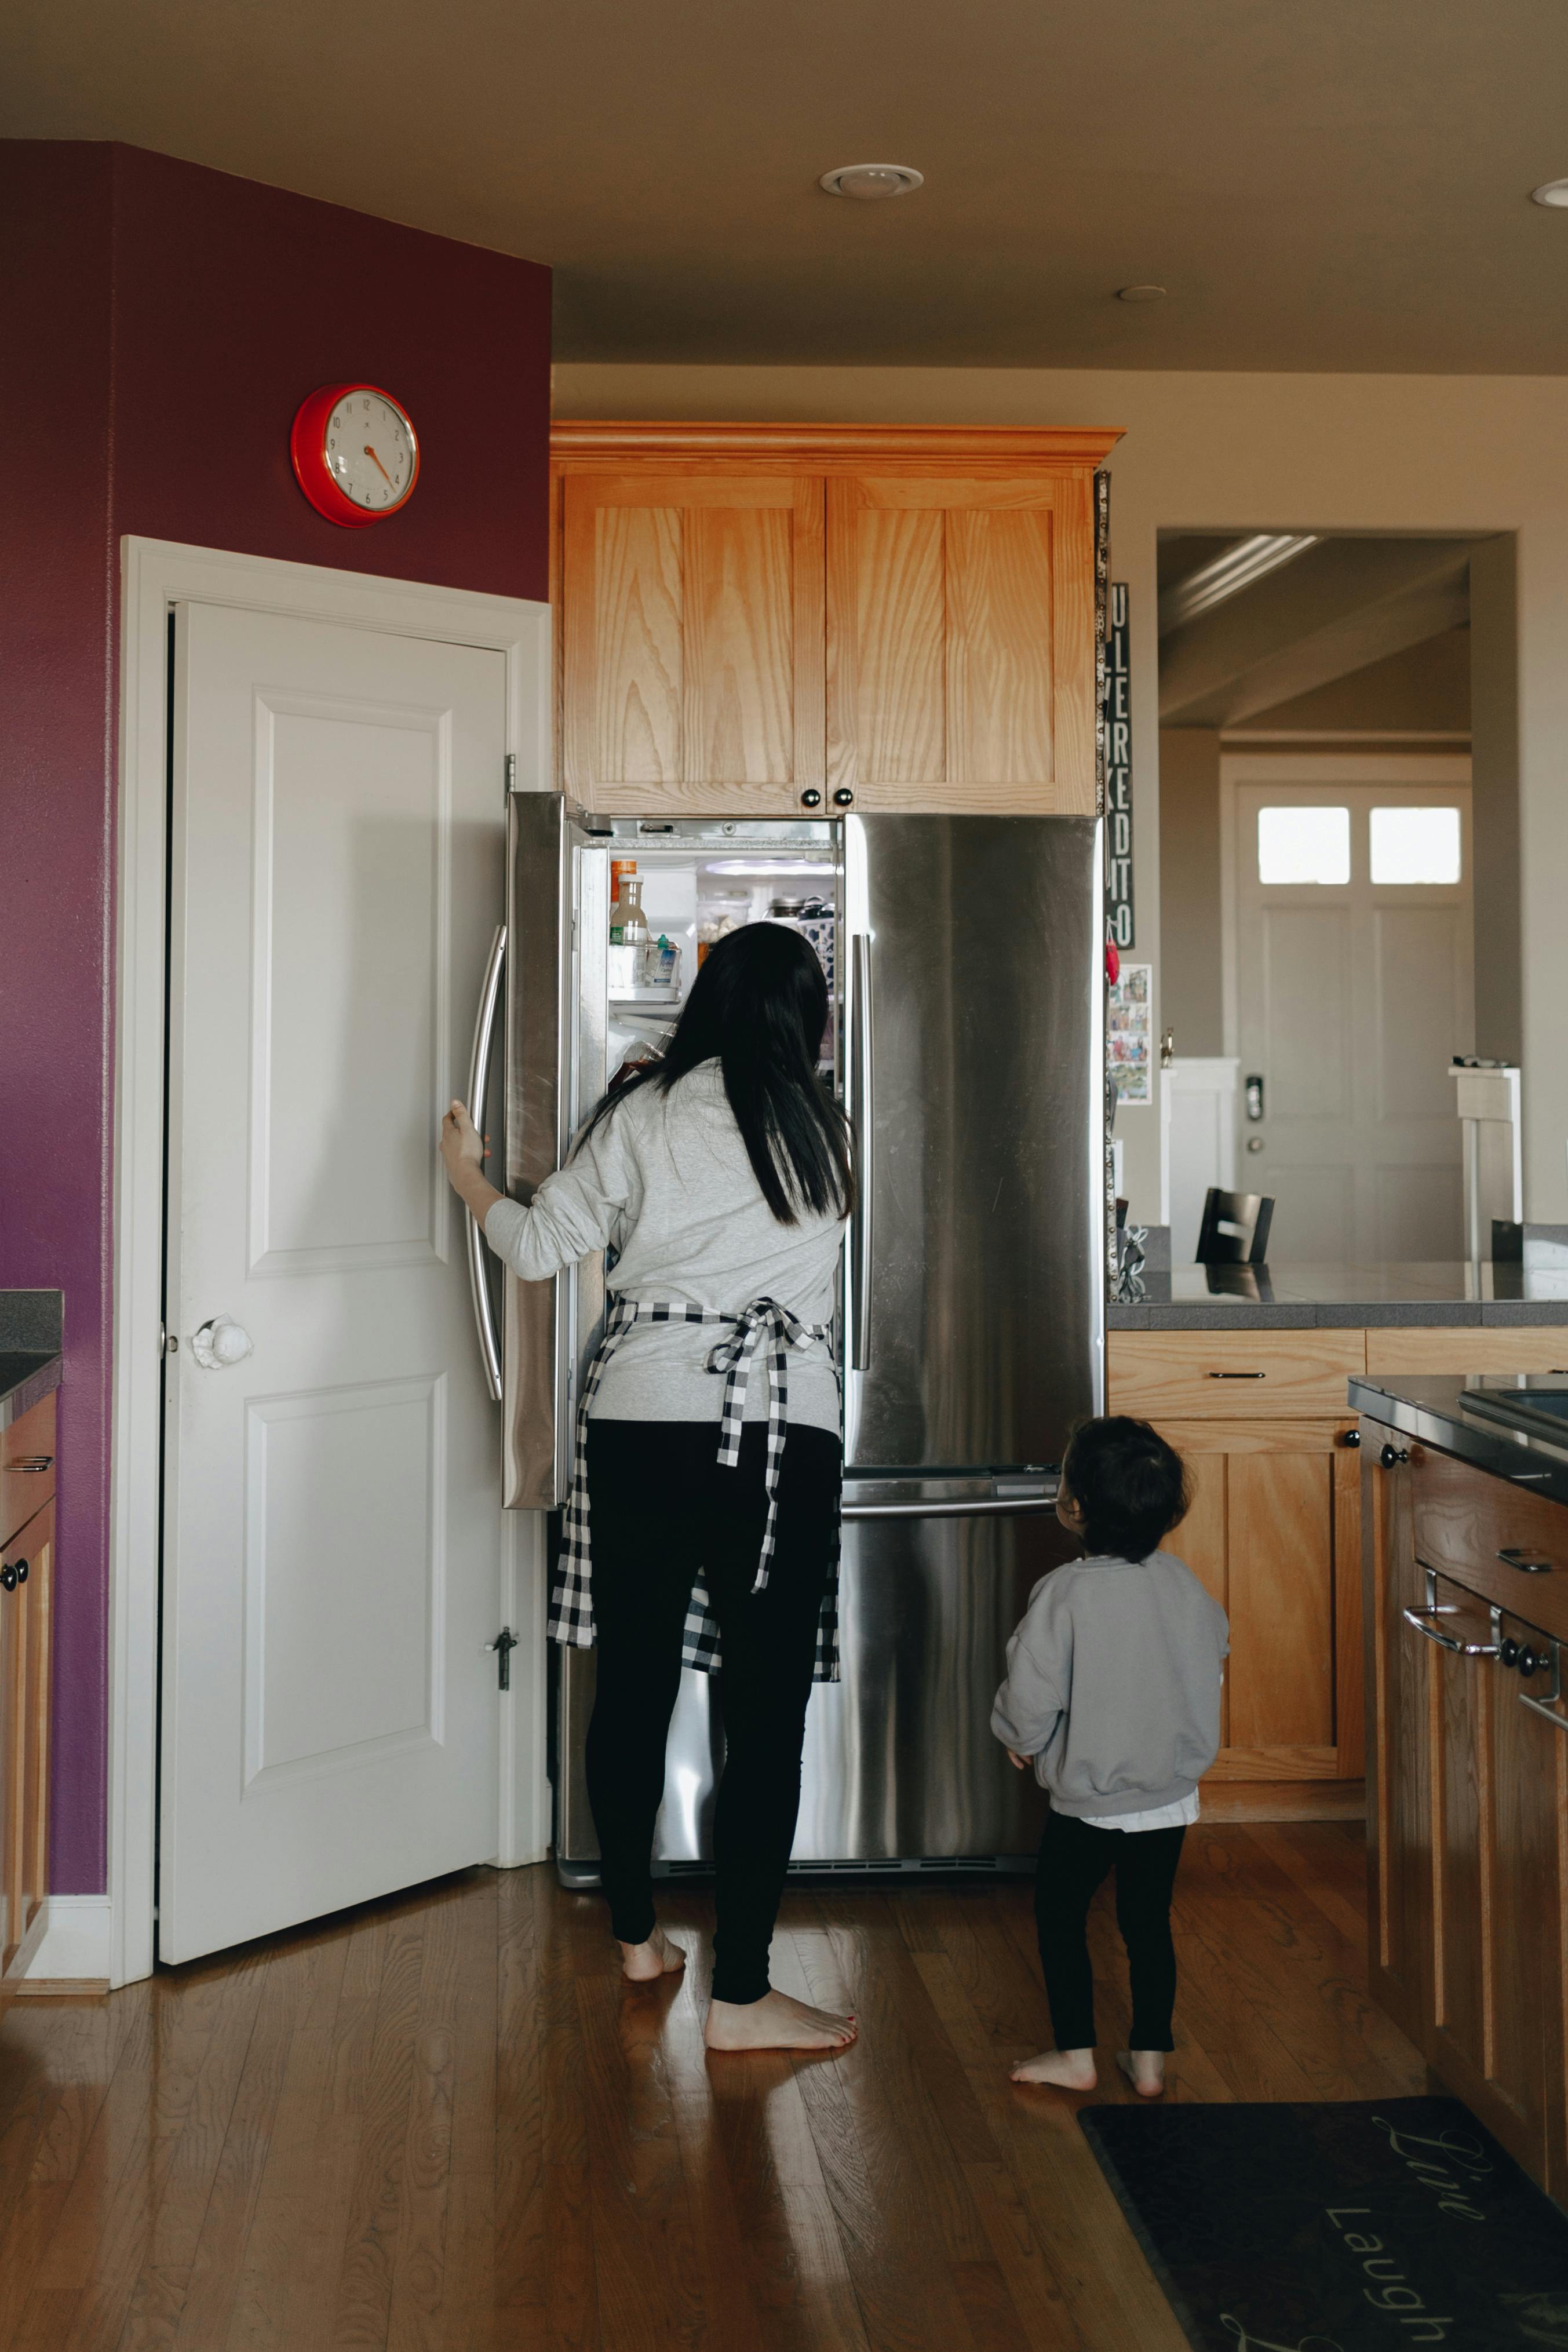 Young girl with her mother in the kitchen. For illustration purposes only | Source: Pexels